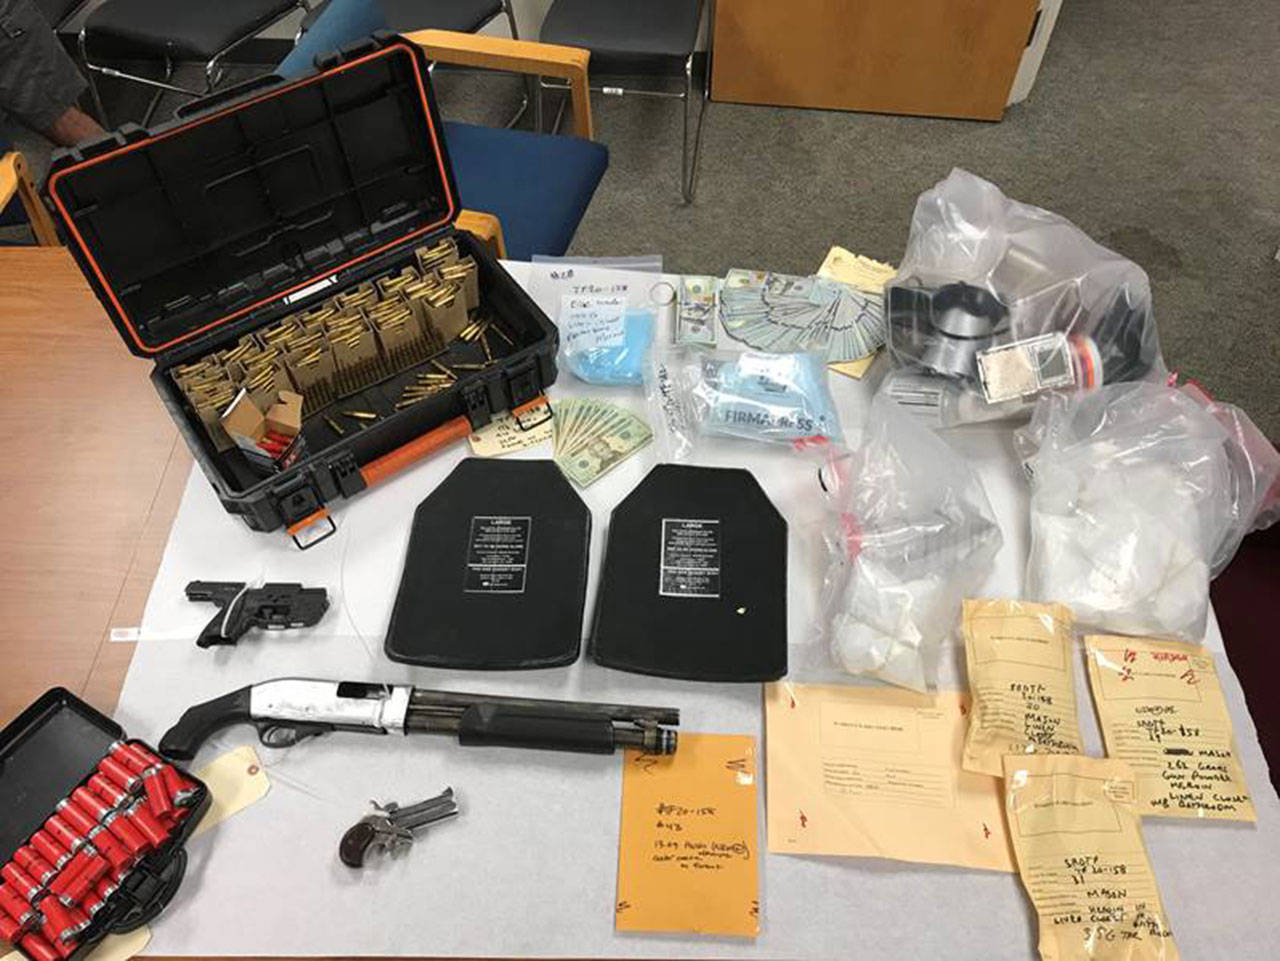 Officers and investigators found guns, body armor plates, fentanyl and heroin at a home in Lynnwood on July 25. (Snohomish County Sheriff’s Office)